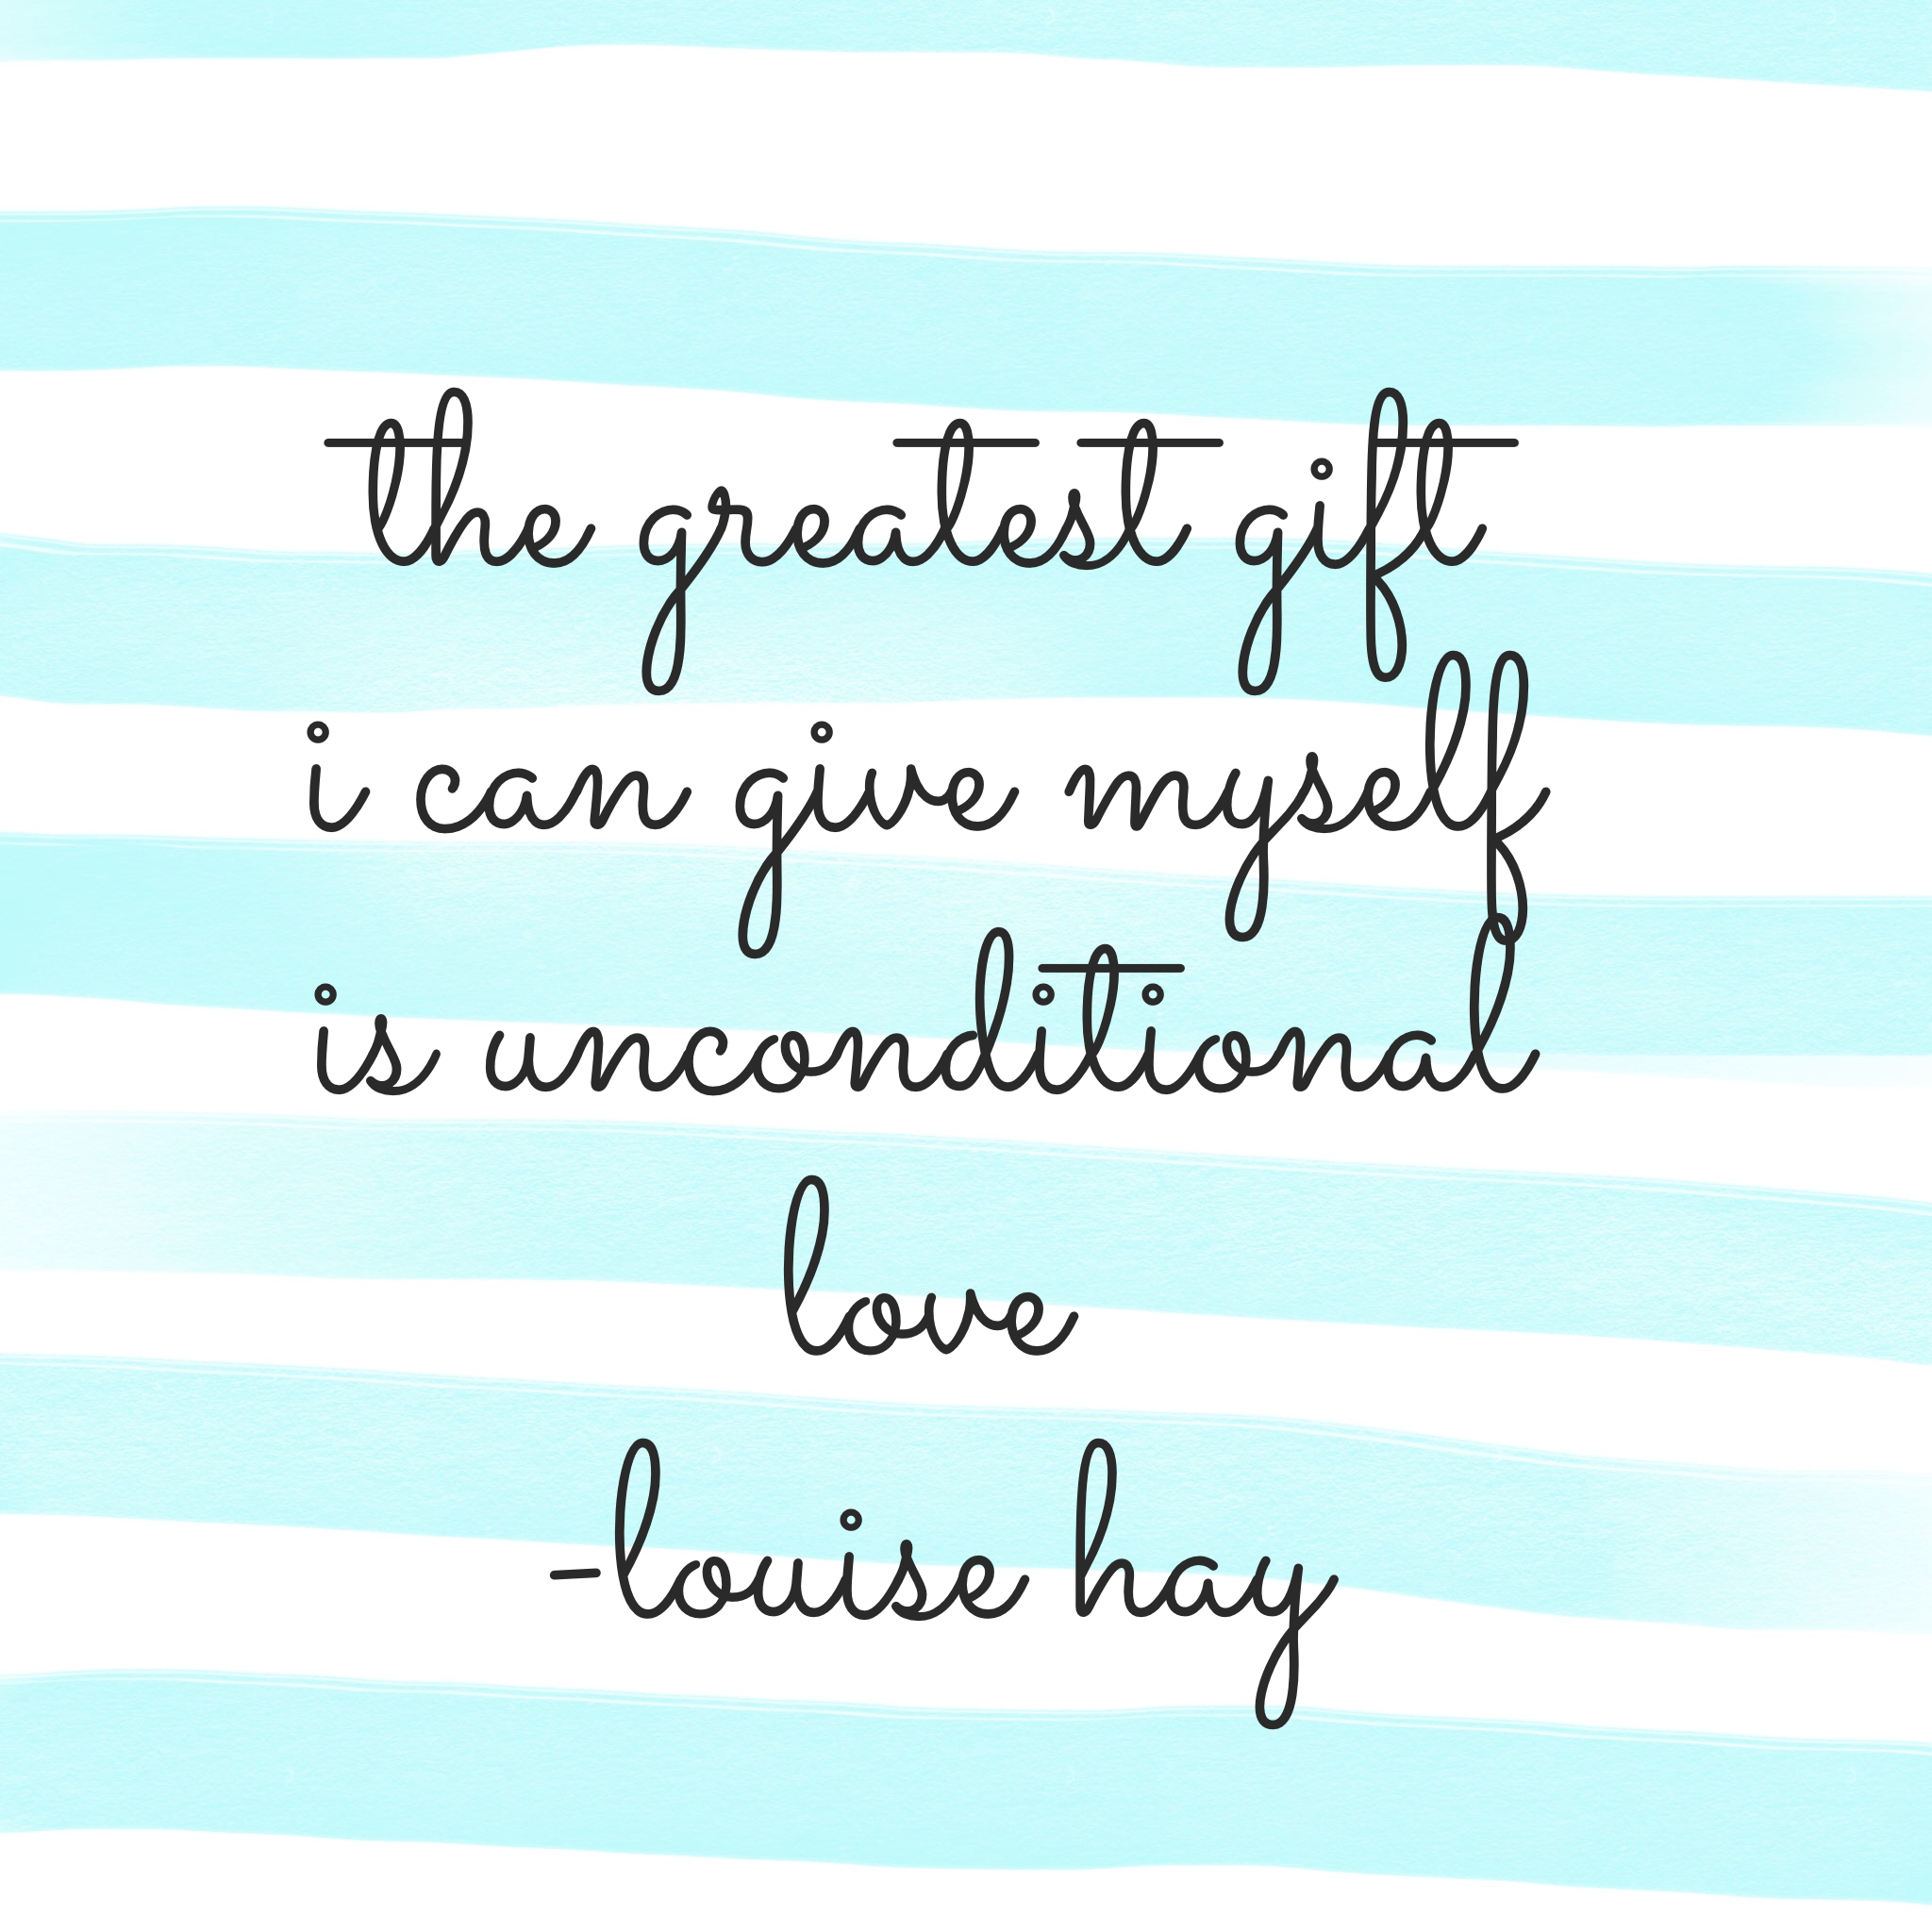 Sharing A Journey image of Favorite Affirmation Unconditional Love Quote by Louise Hay